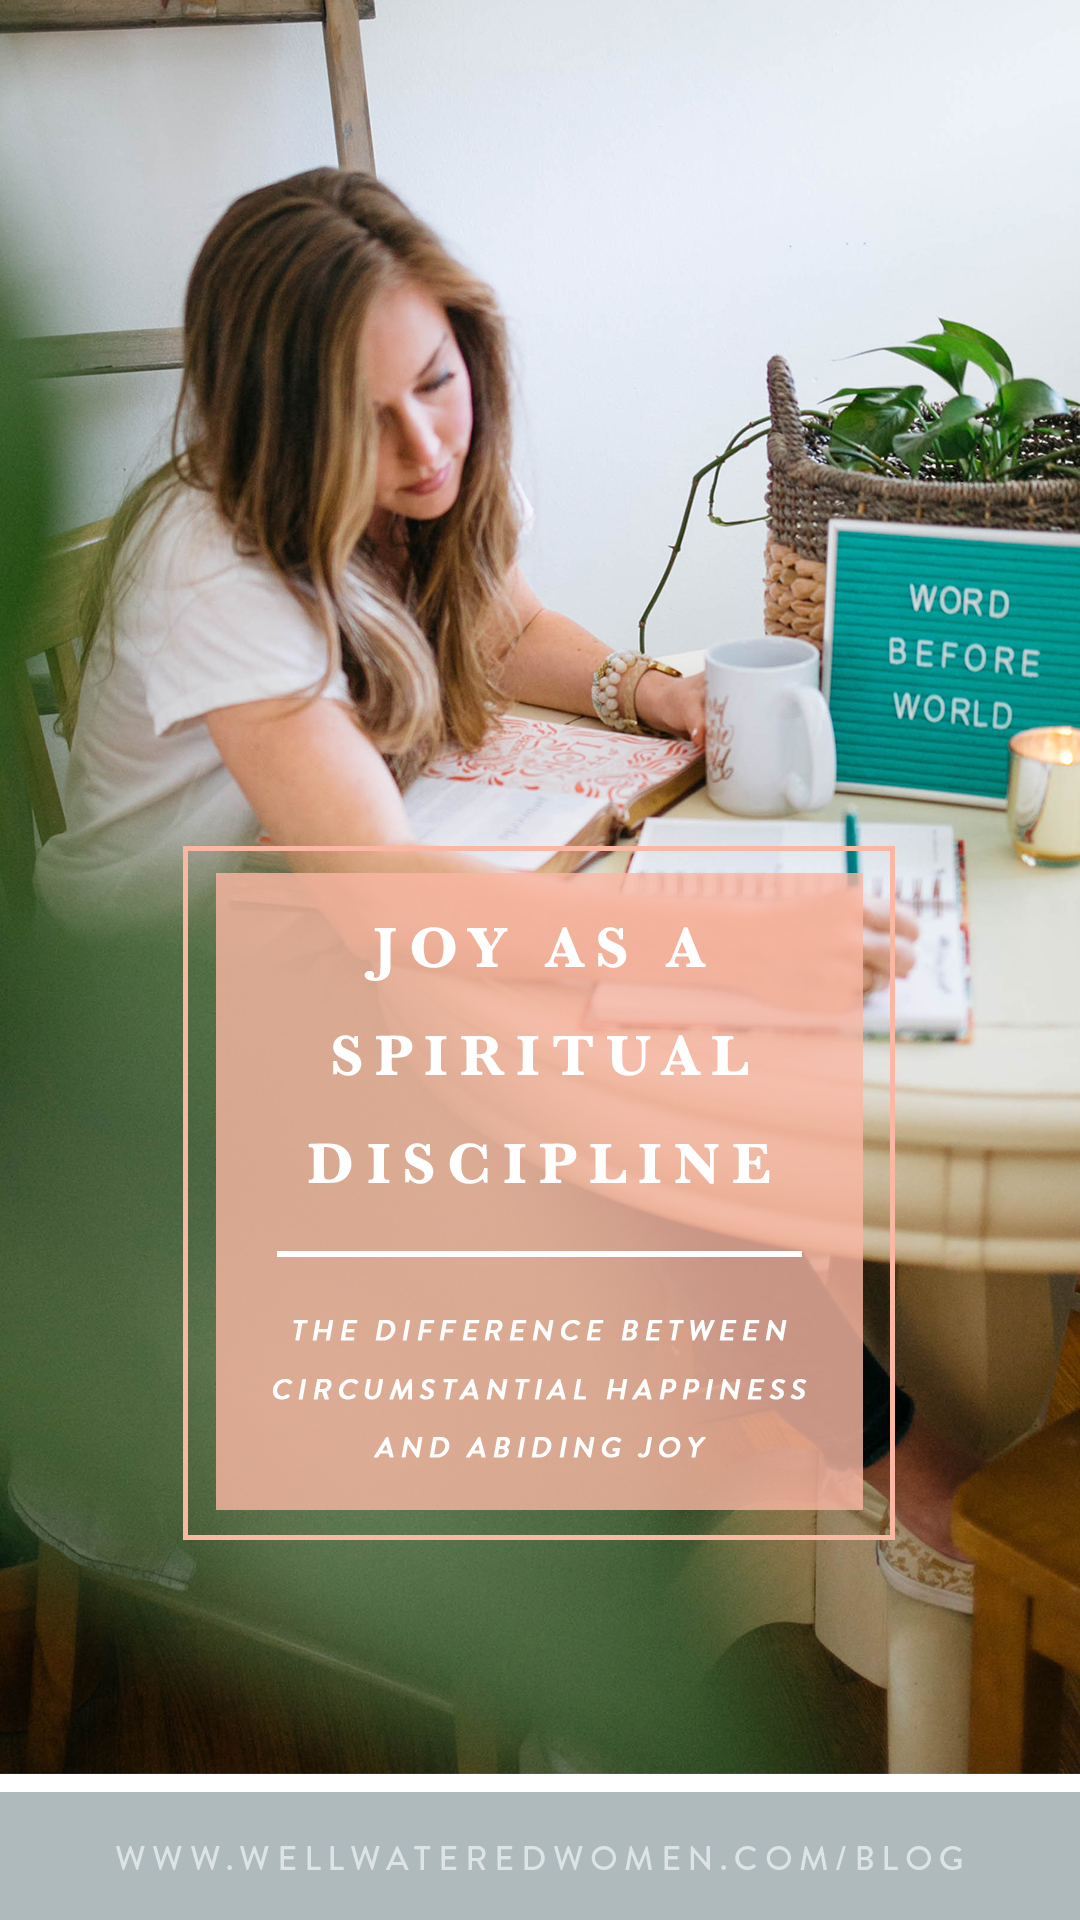 Joy as a Spiritual Discipline: The difference between circumstantial happiness and abiding joy